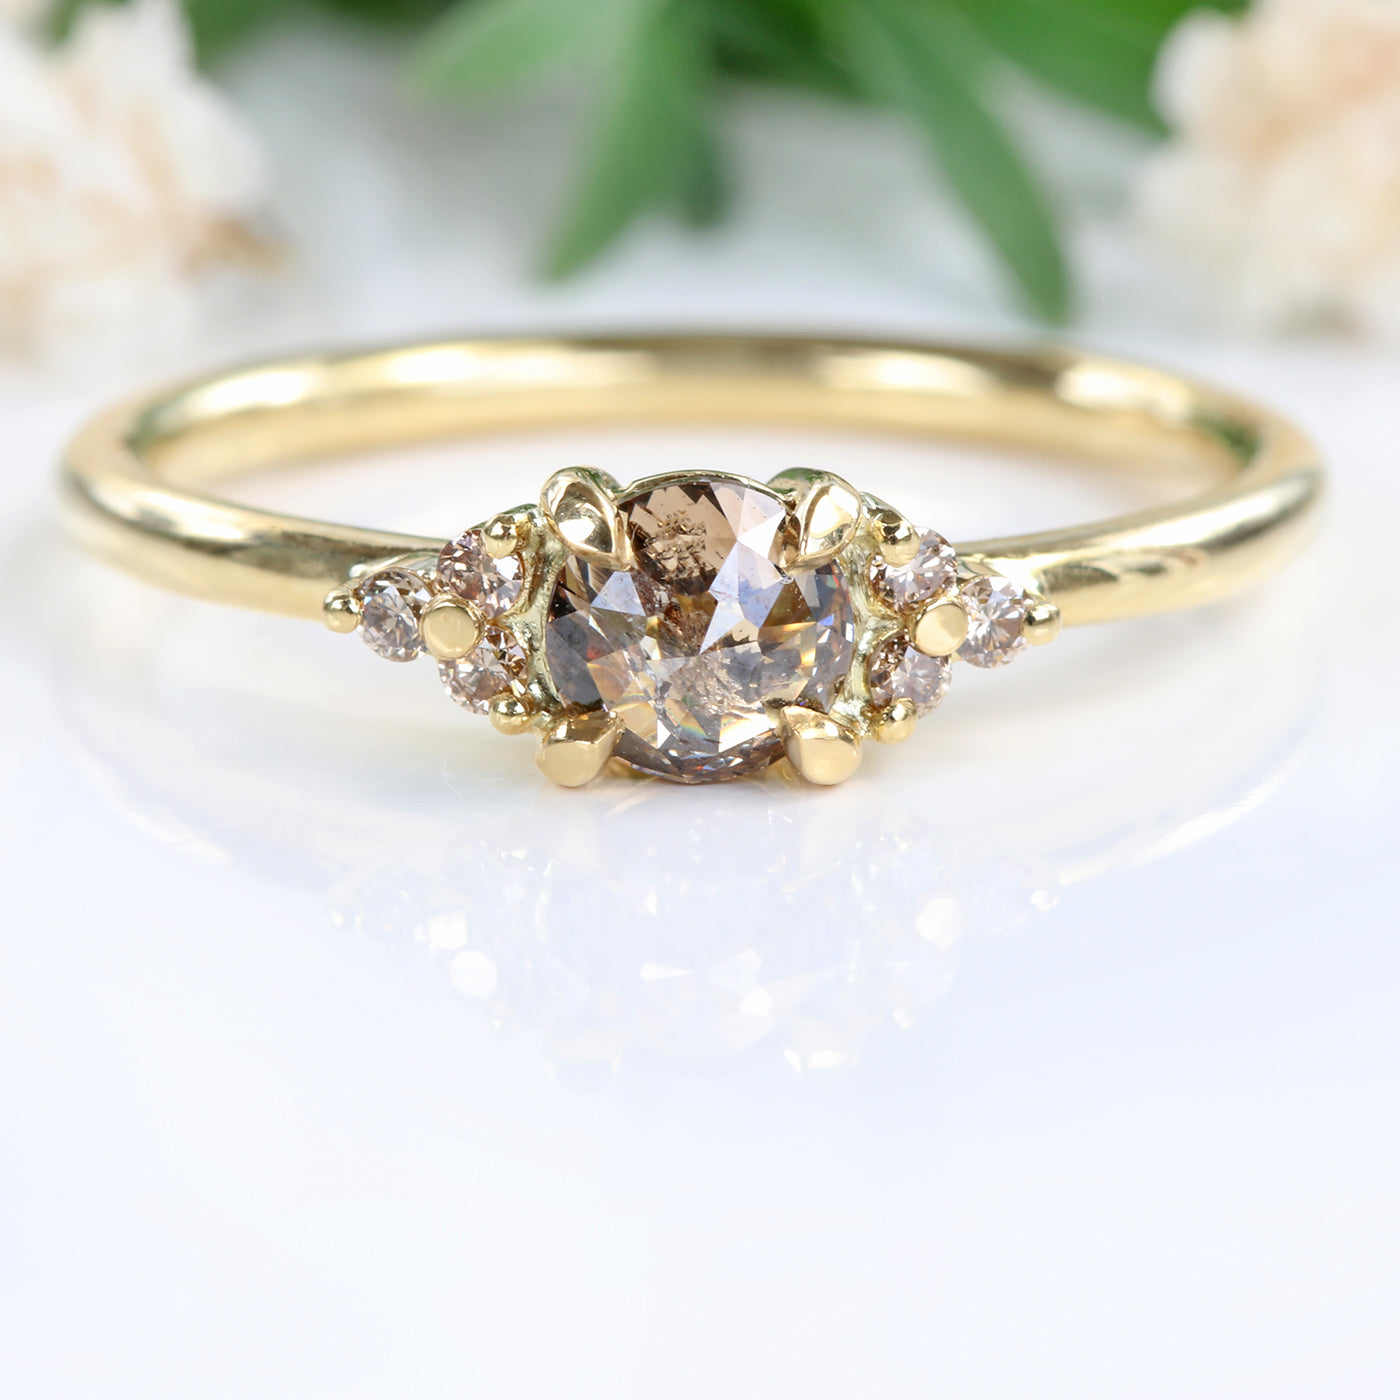 18ct Gold Champagne Diamond Cluster Engagement Ring (Size K 1/2, Resize I 1/2 to L)